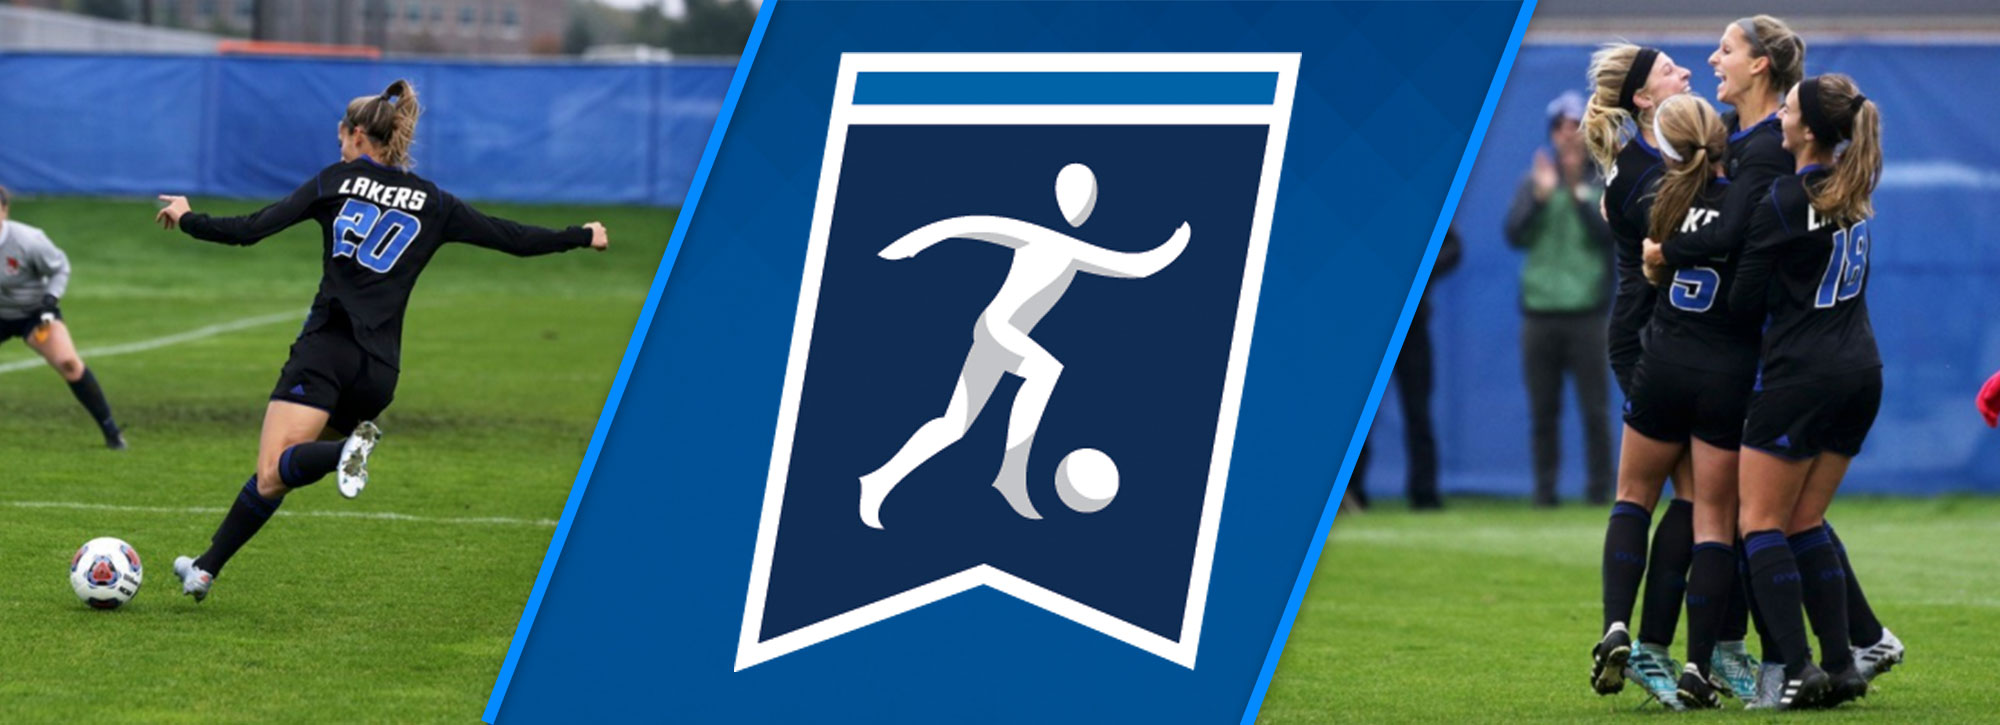 Grand Valley State Earns No. 1 Seed in NCAA Women's Soccer Tournament Midwest Region